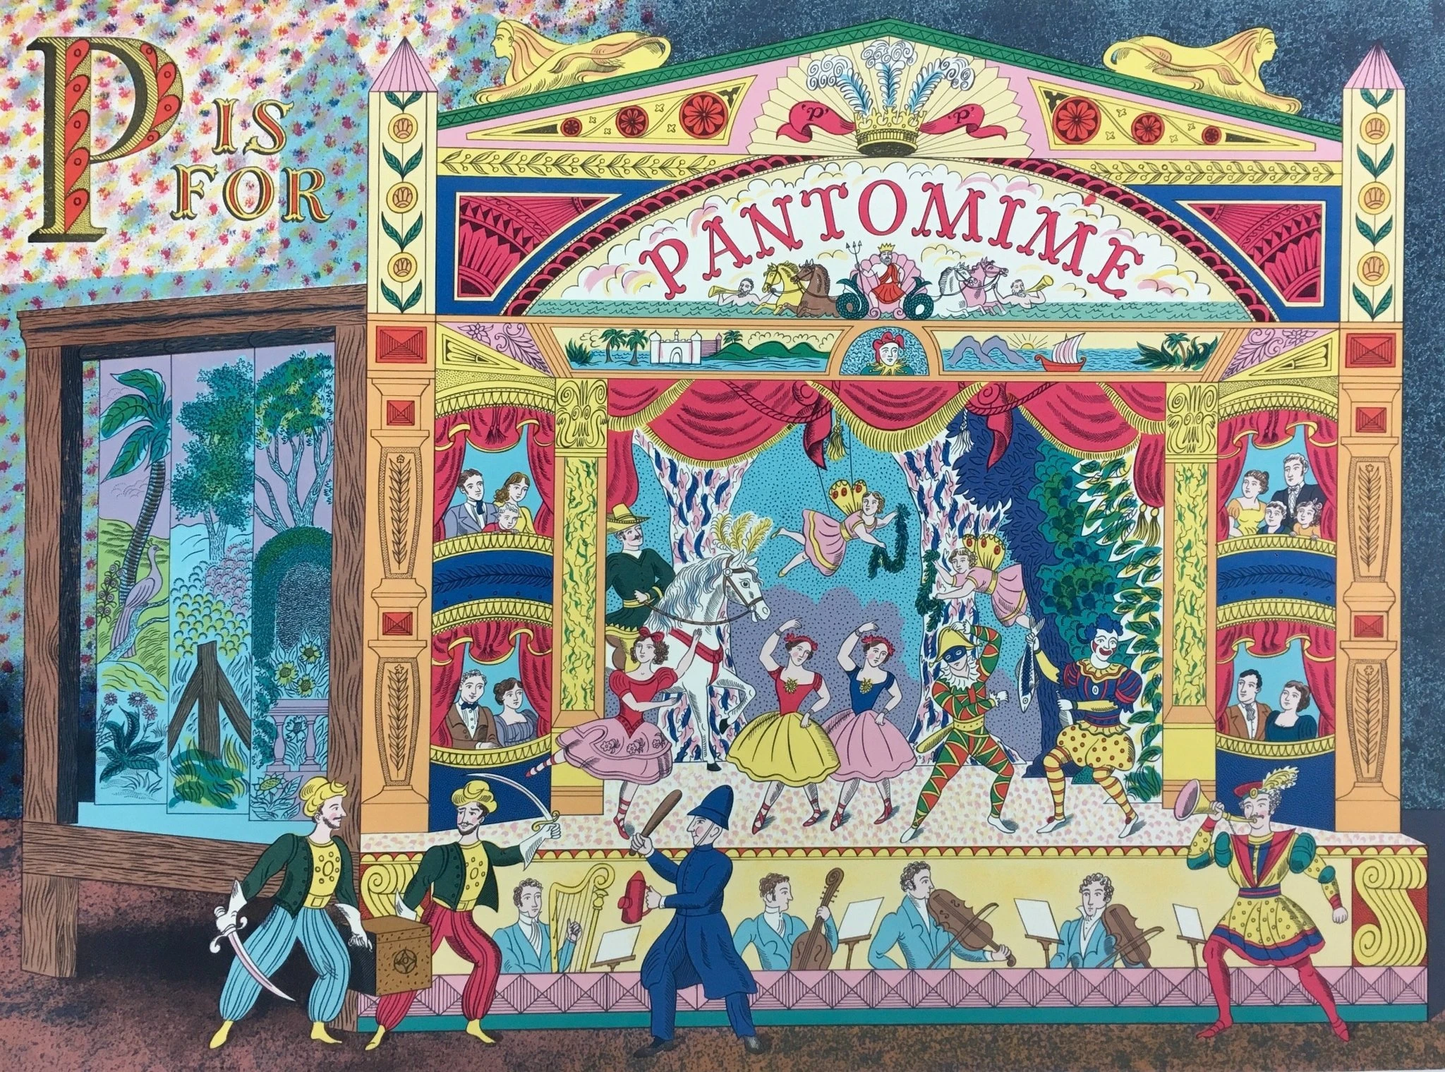 P is for Pantomime